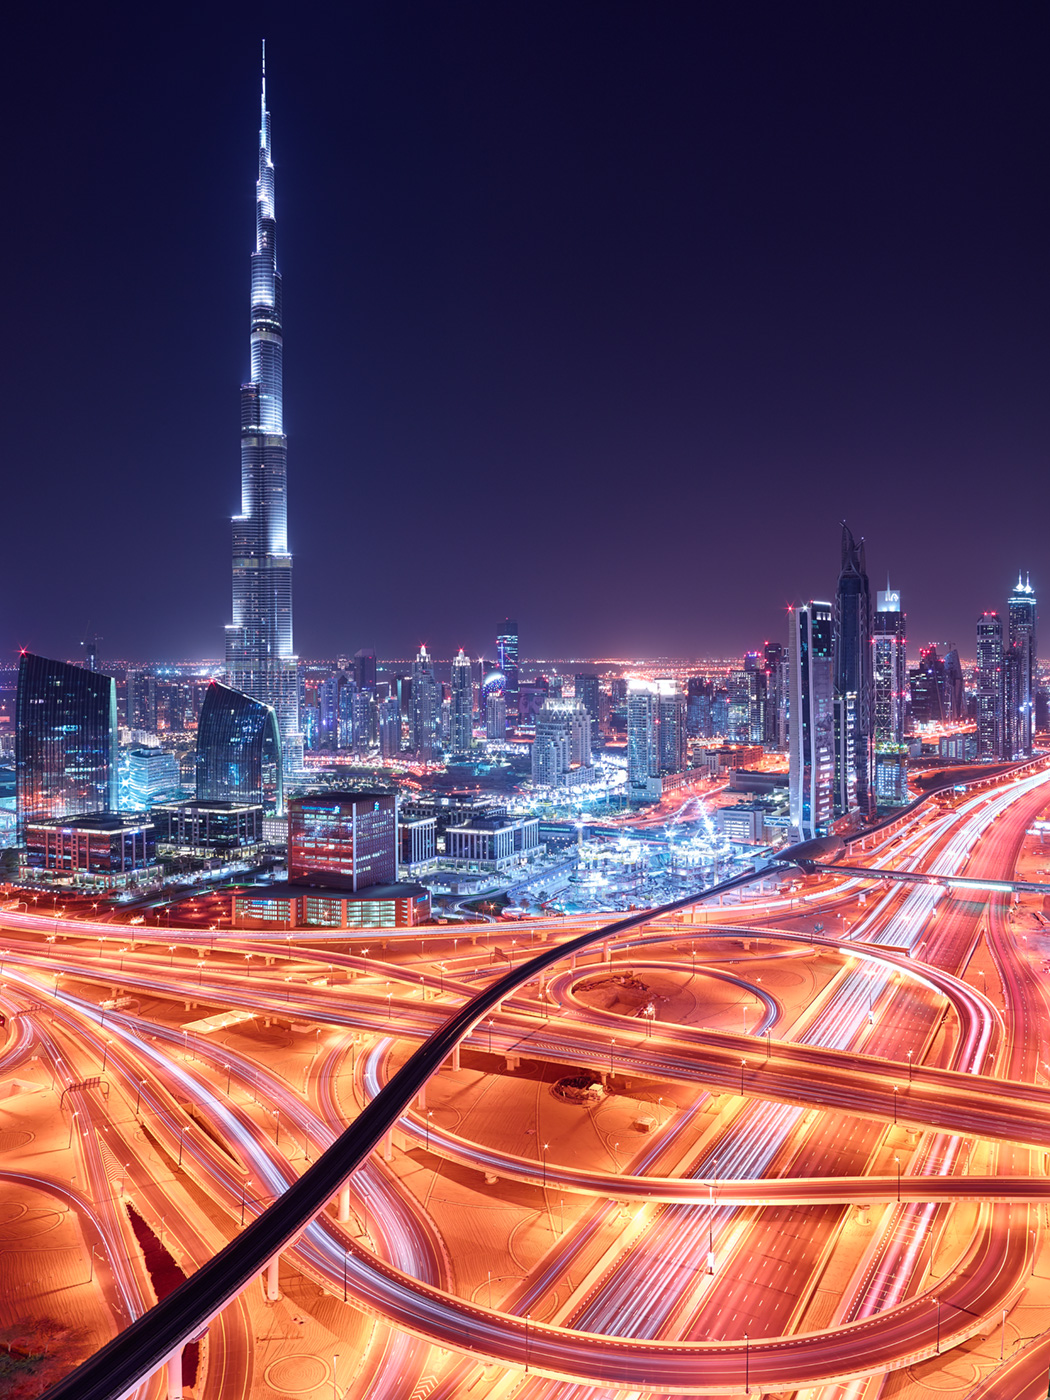 dubai burj khalifa road intersection freeway UAE night cityscape skyline skyscrapers downtown city of gold image copyright paul reiffer no reproduction permitted